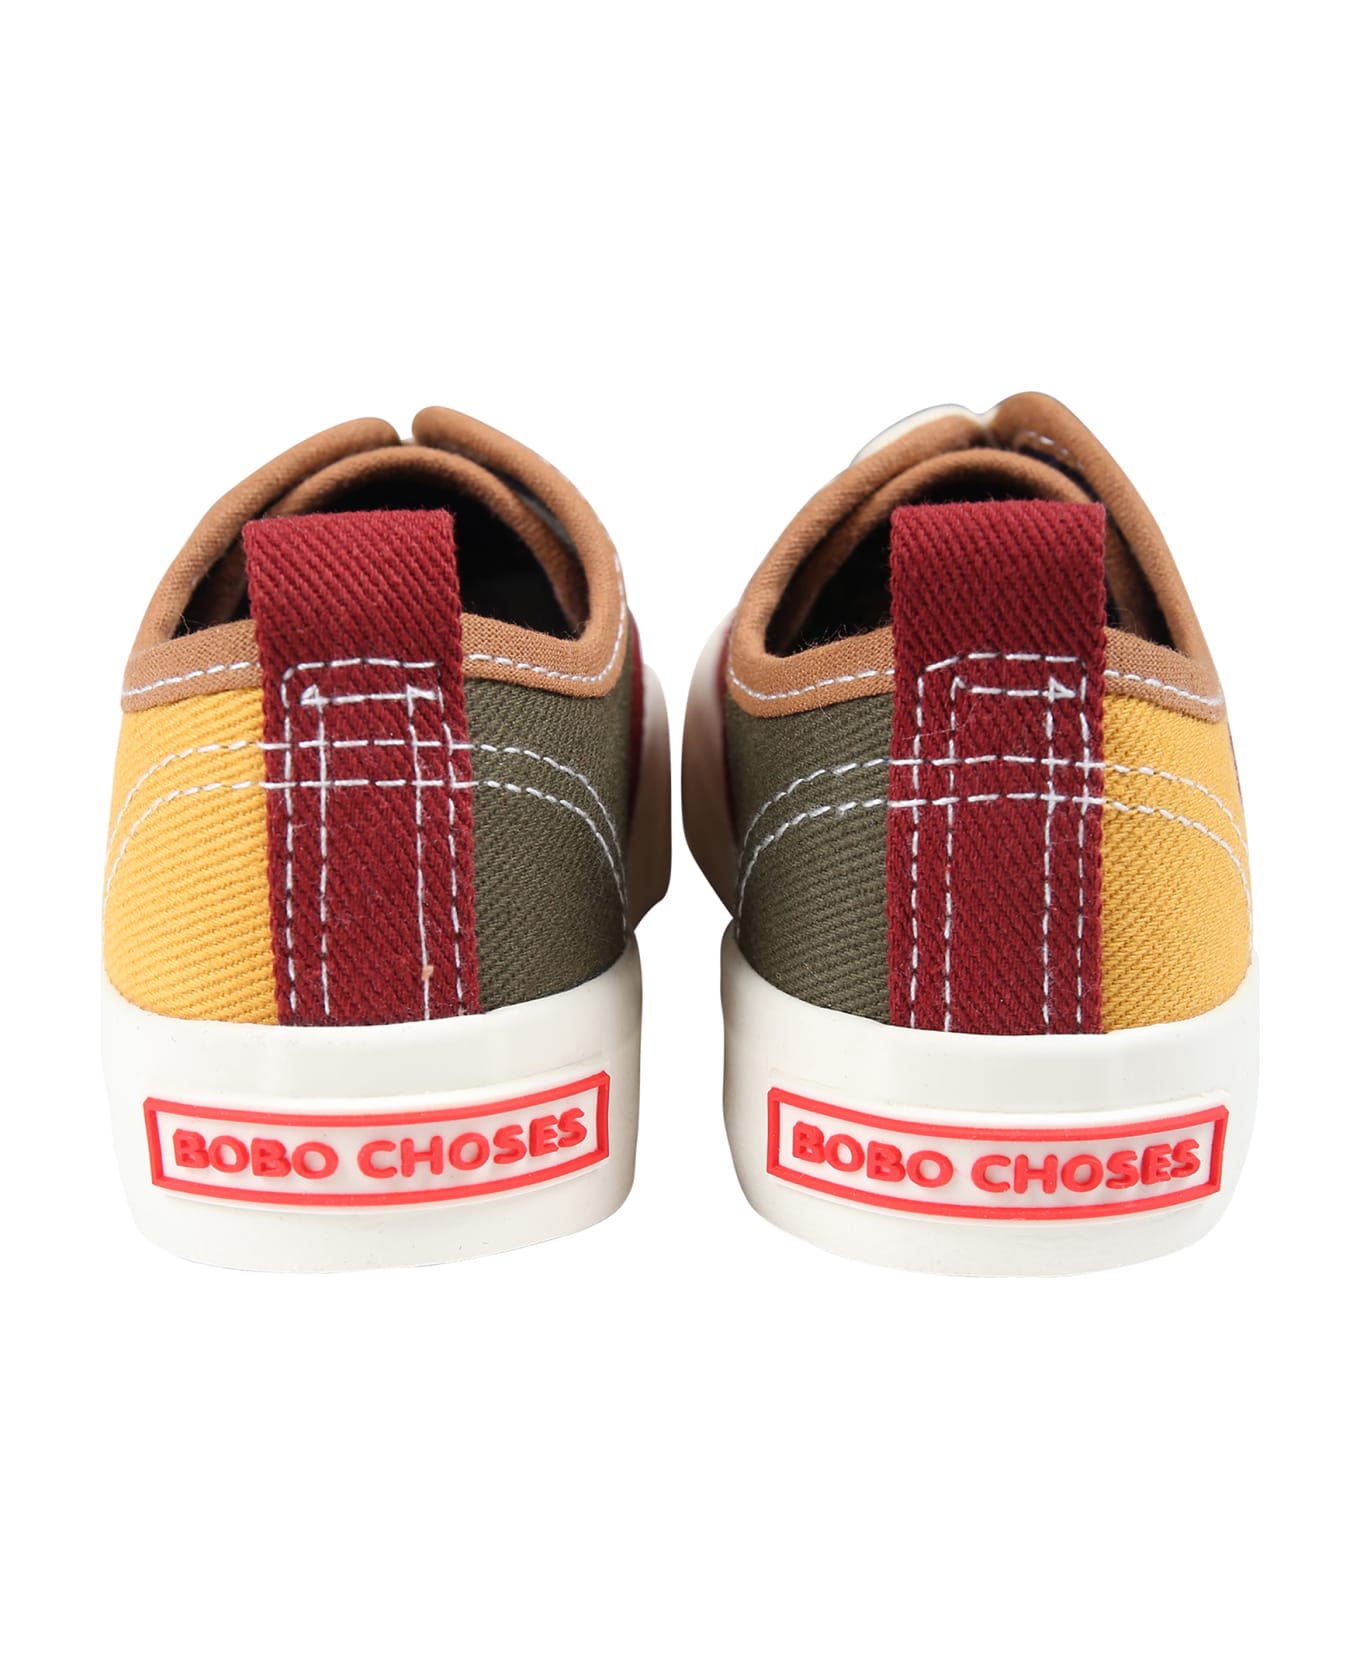 Bobo Choses Multicolor Sneakers For Kids With Logo - Multicolor シューズ